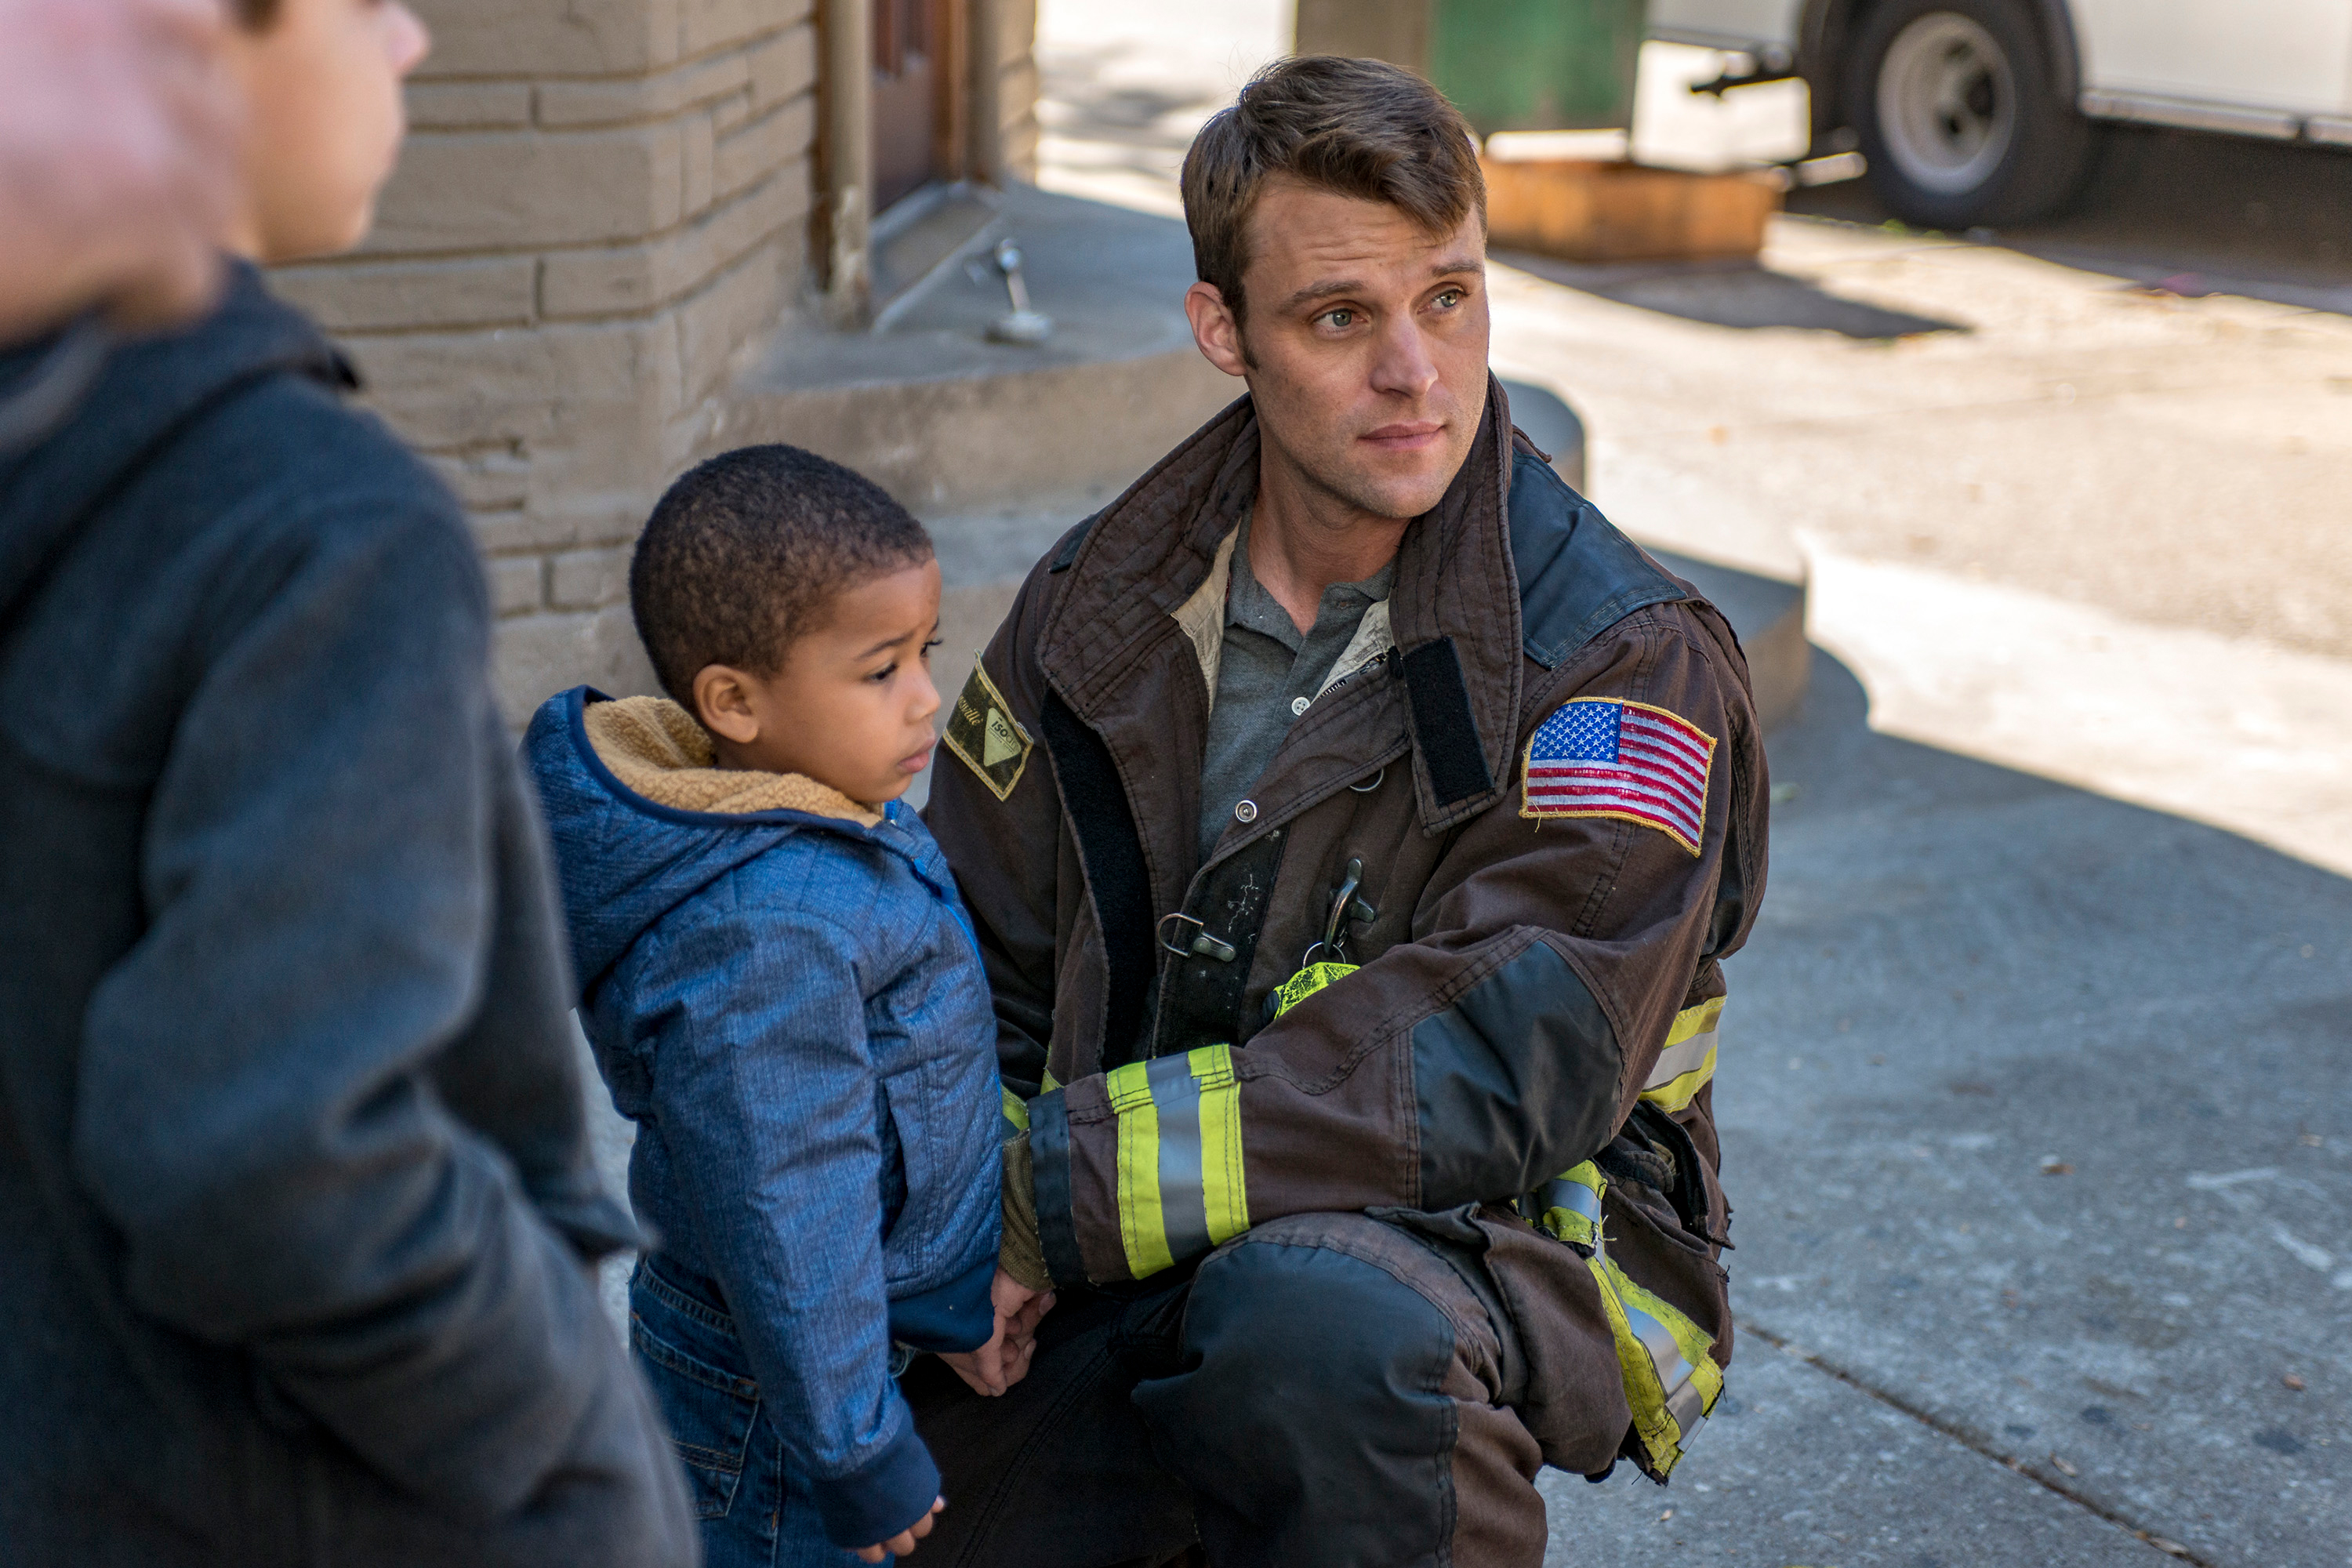 Matt Casey is confirmed to return on the 12th season of Chicago Fire